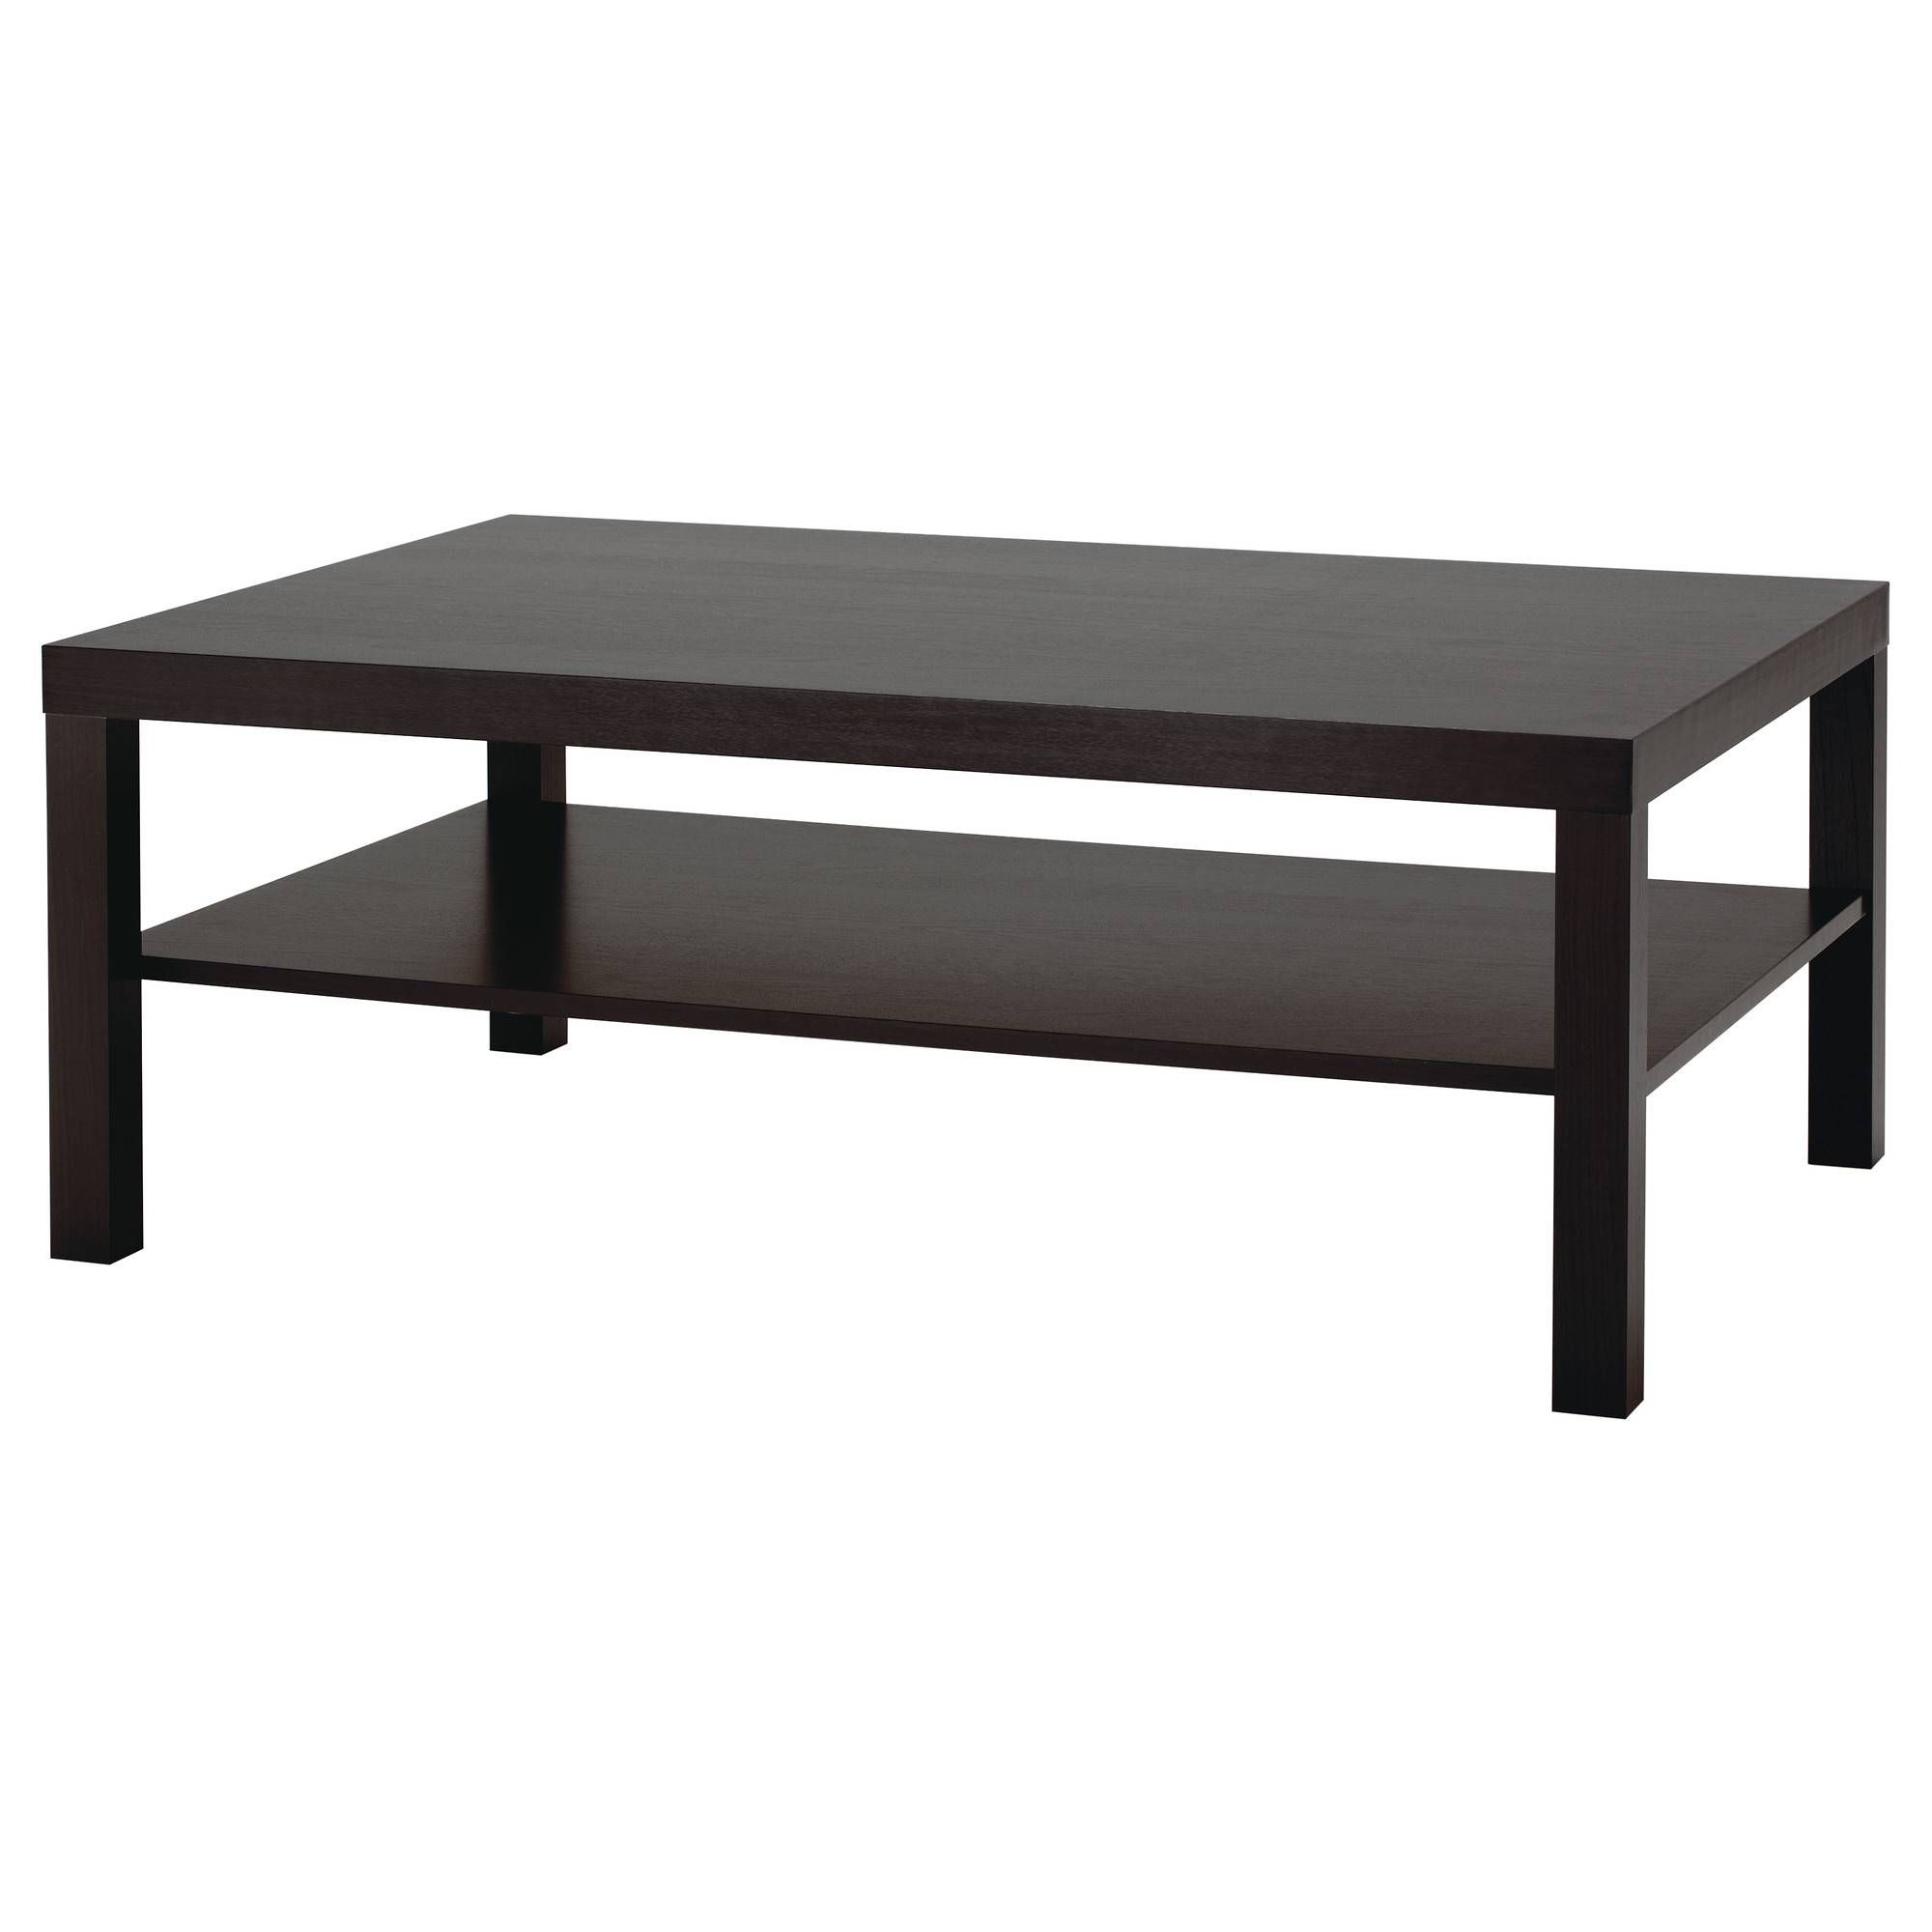 Lack Coffee Table – Black Brown – Ikea Intended For Low Level Coffee Tables (View 6 of 15)